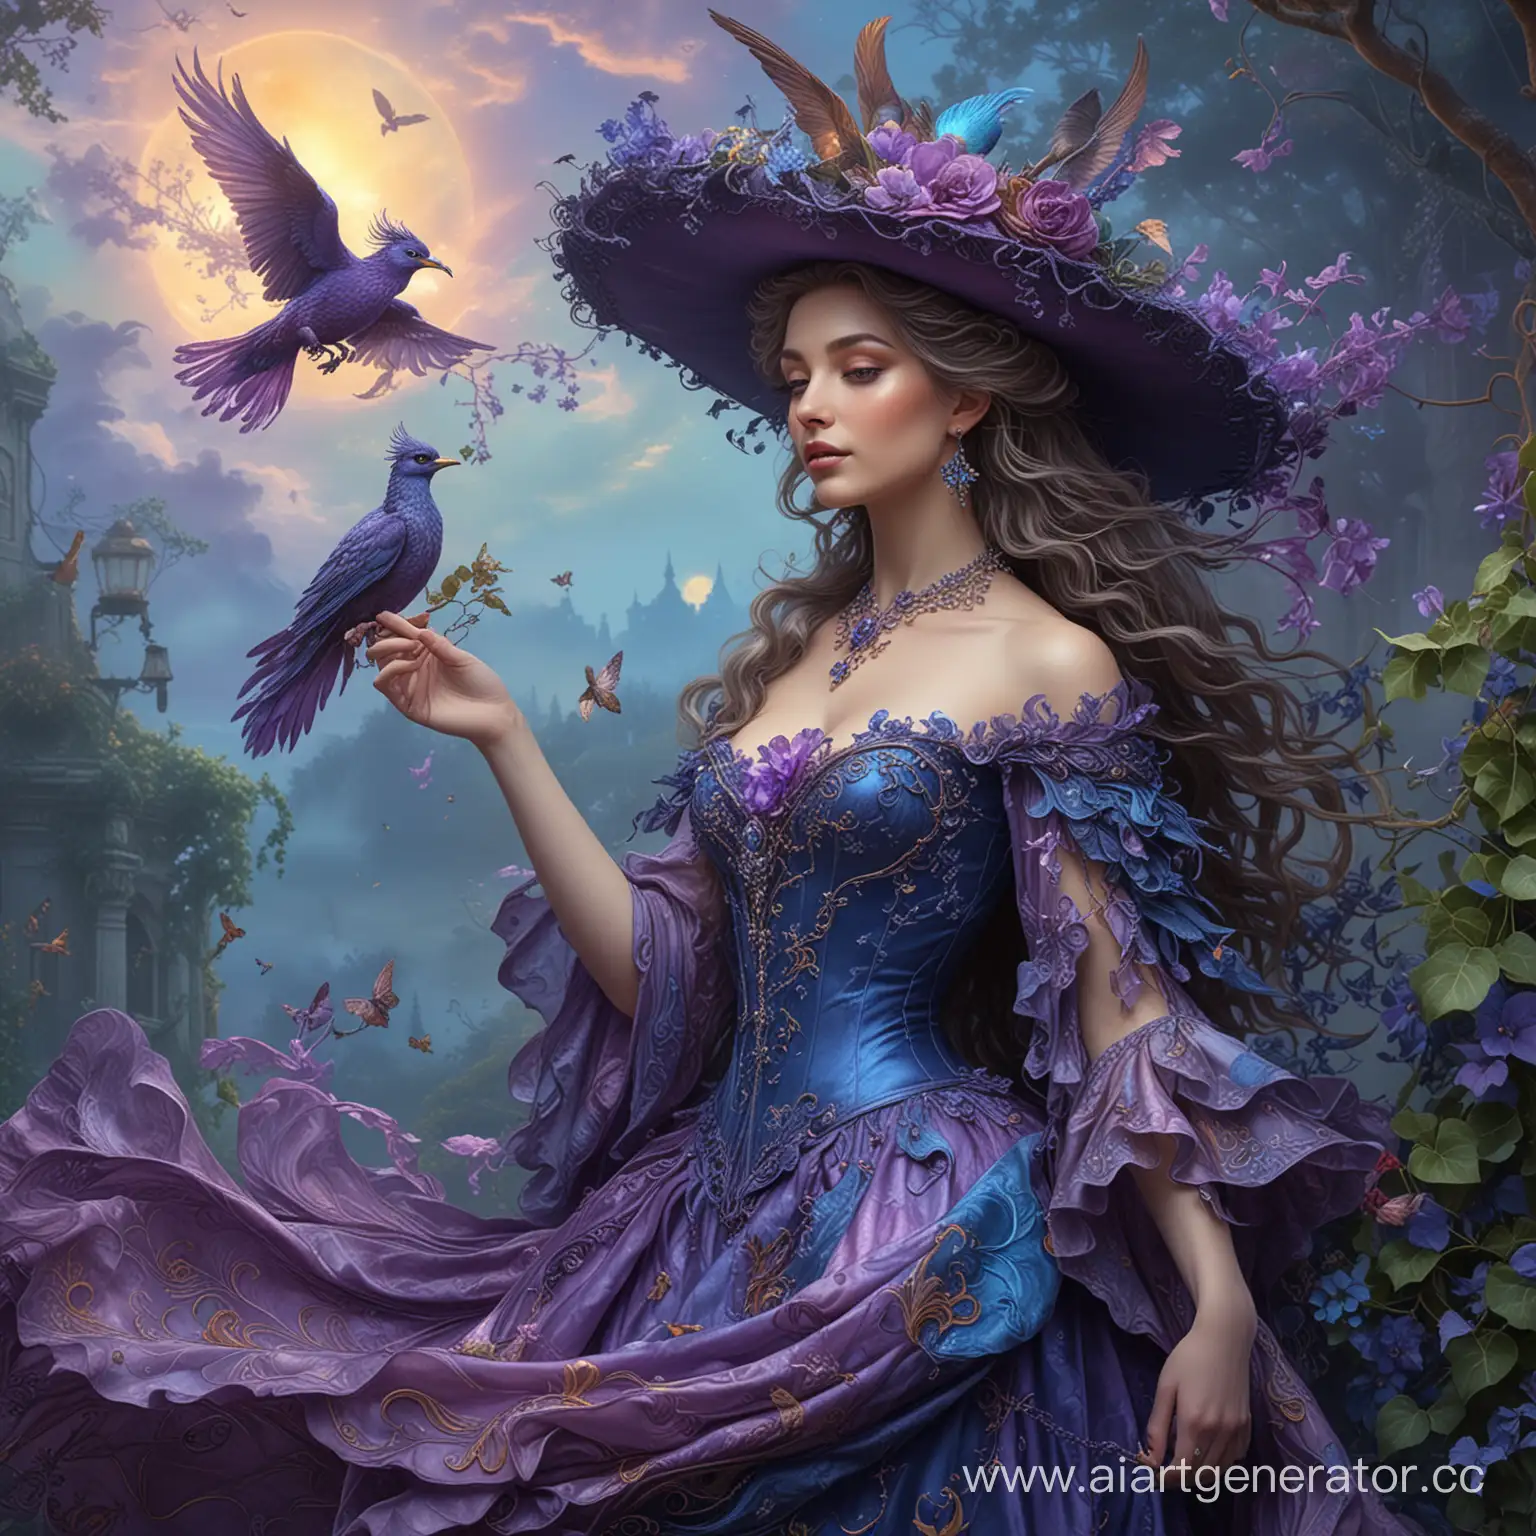 Enchanted-Witch-with-Firebird-in-a-Josephine-WallStyle-Fantasy-Landscape